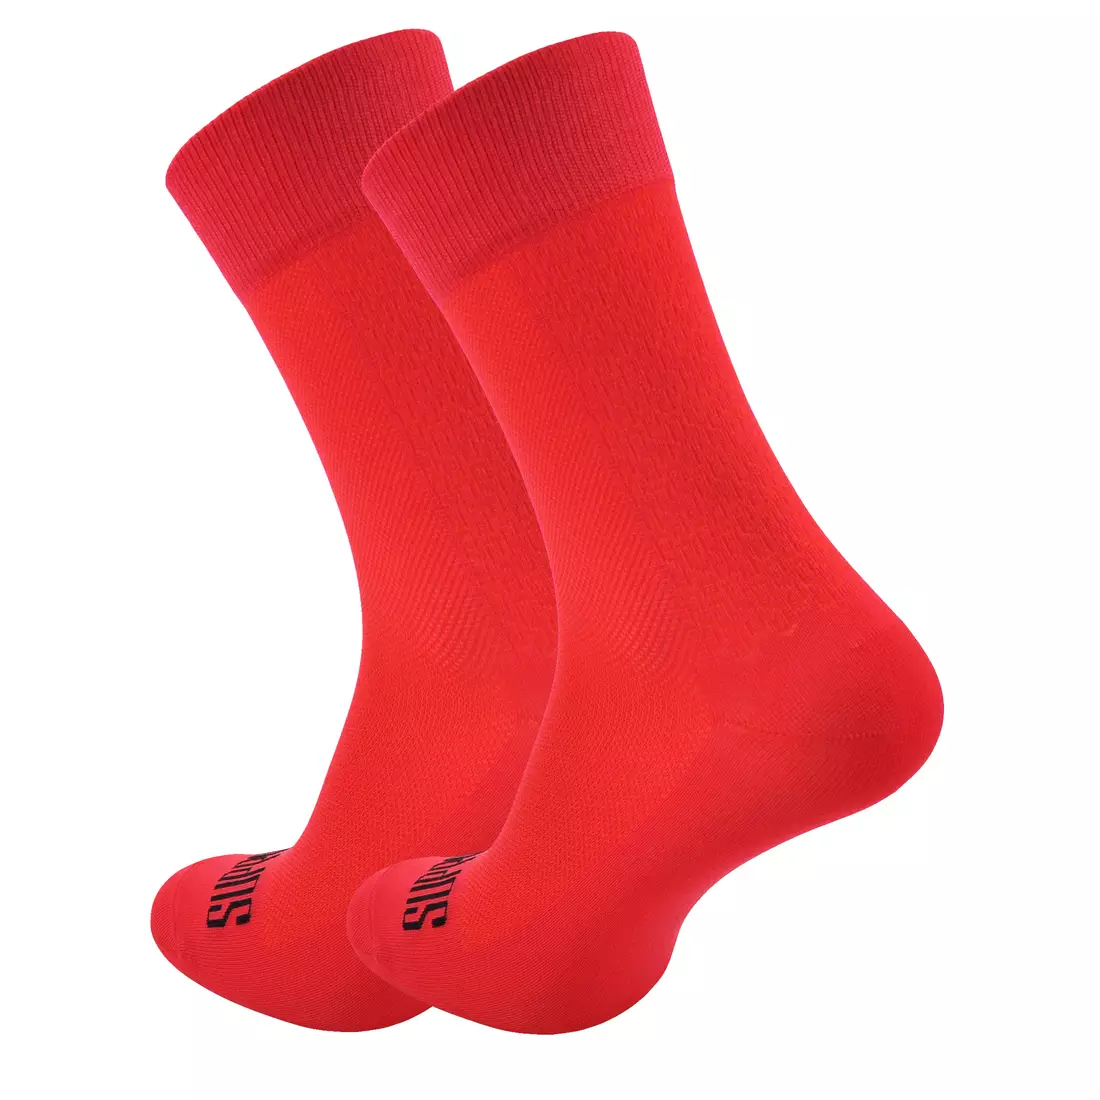 SUPPORTSPORT cycling socks S-LIGHT red